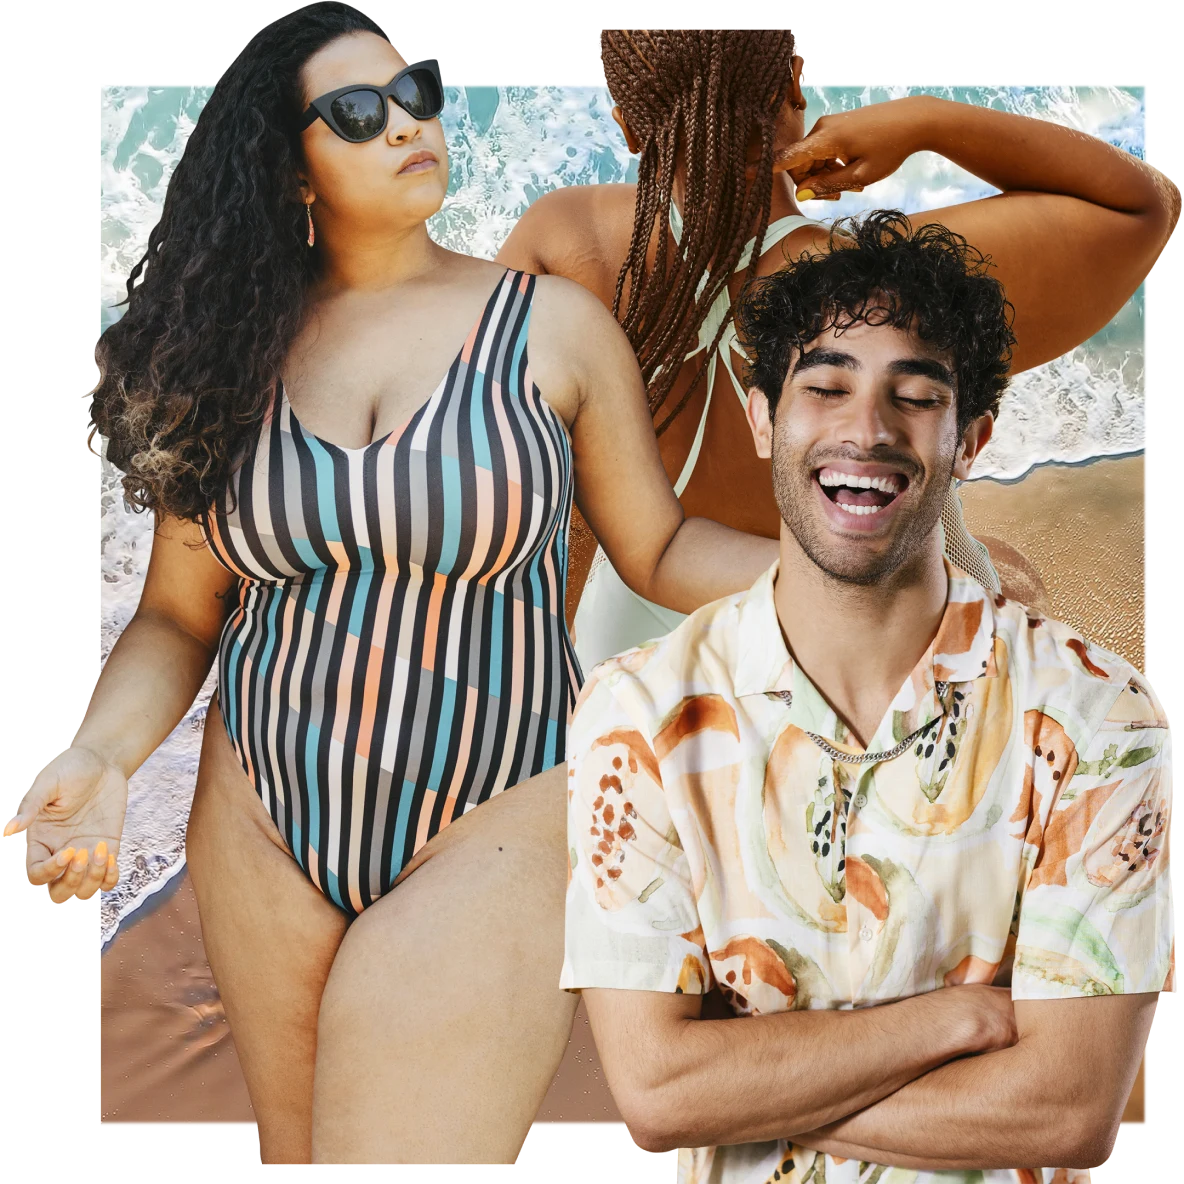 Collage of people ready for the beach: A woman in sunglasses and a striped swimsuit. A man wearing a papaya-patterned, short-sleeved shirt is smiling. A woman with braided hair heads towards the water in the background.